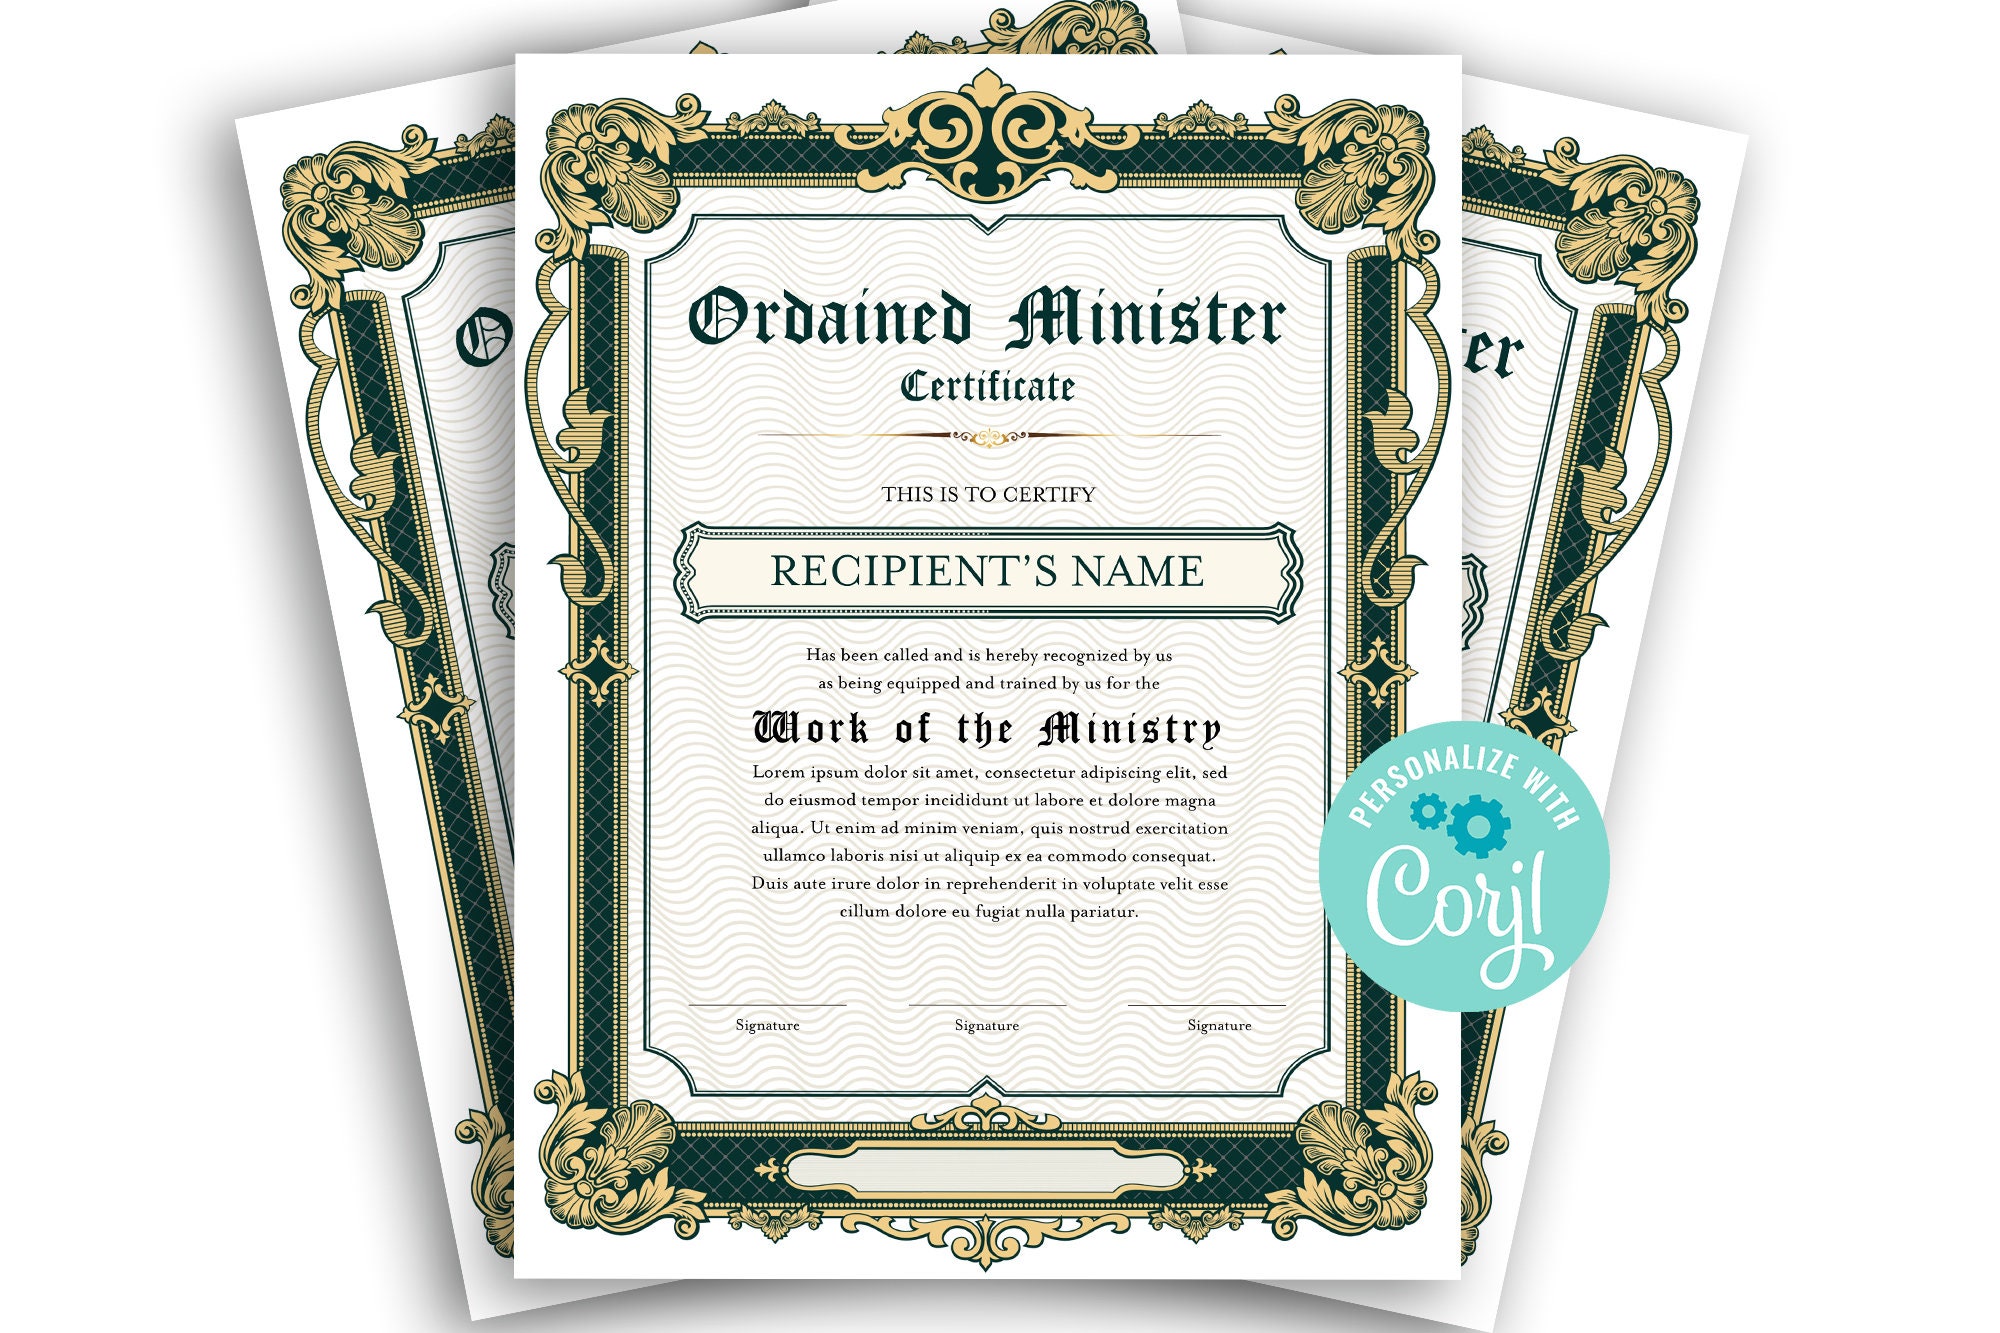 Certificate Of Ordination Minister Editable Template Portrait Etsy